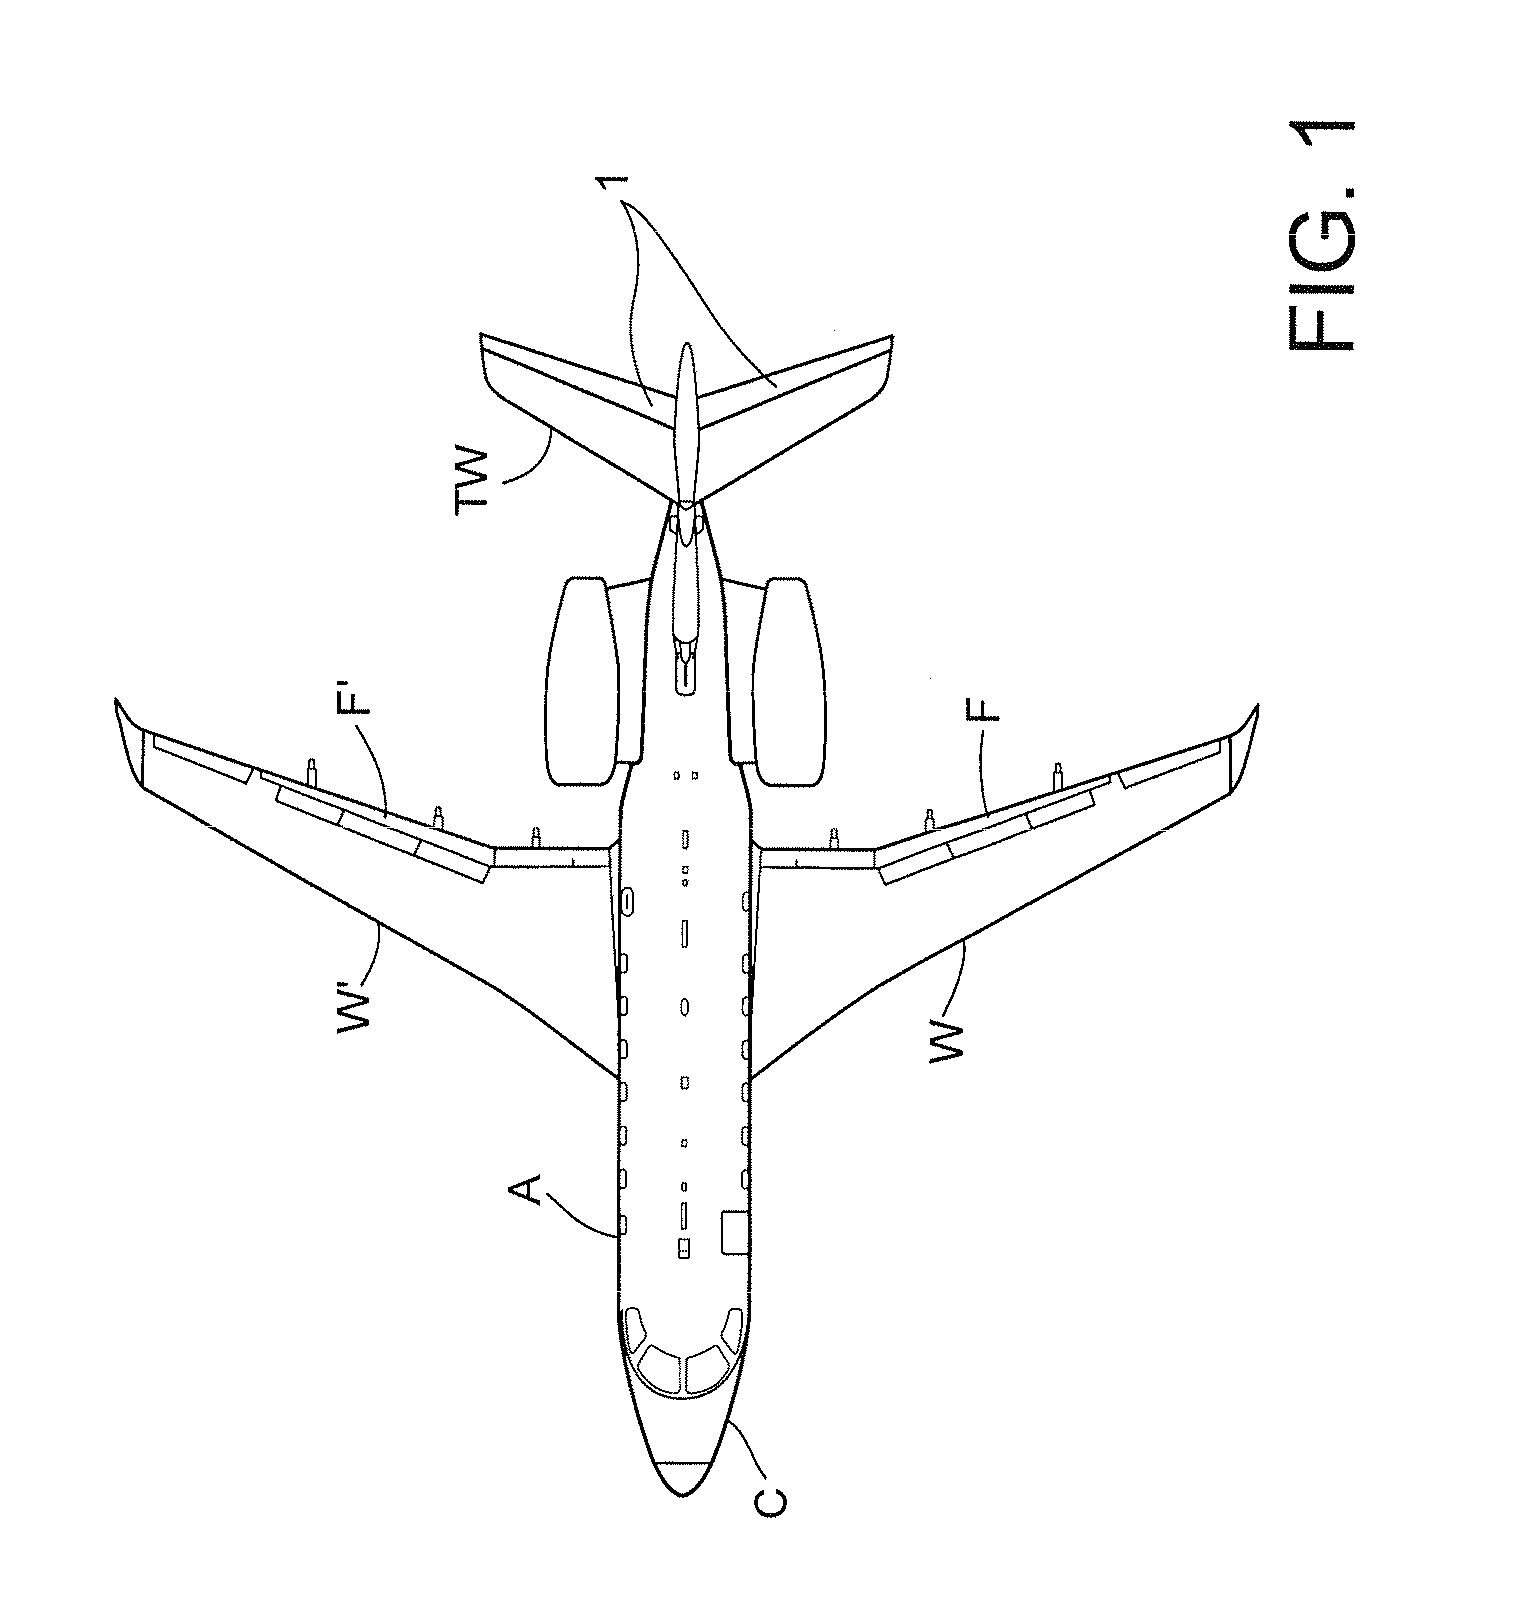 Flight Control System Mode And Method Providing Aircraft Speed Control Through The Usage Of Momentary On-Off Control